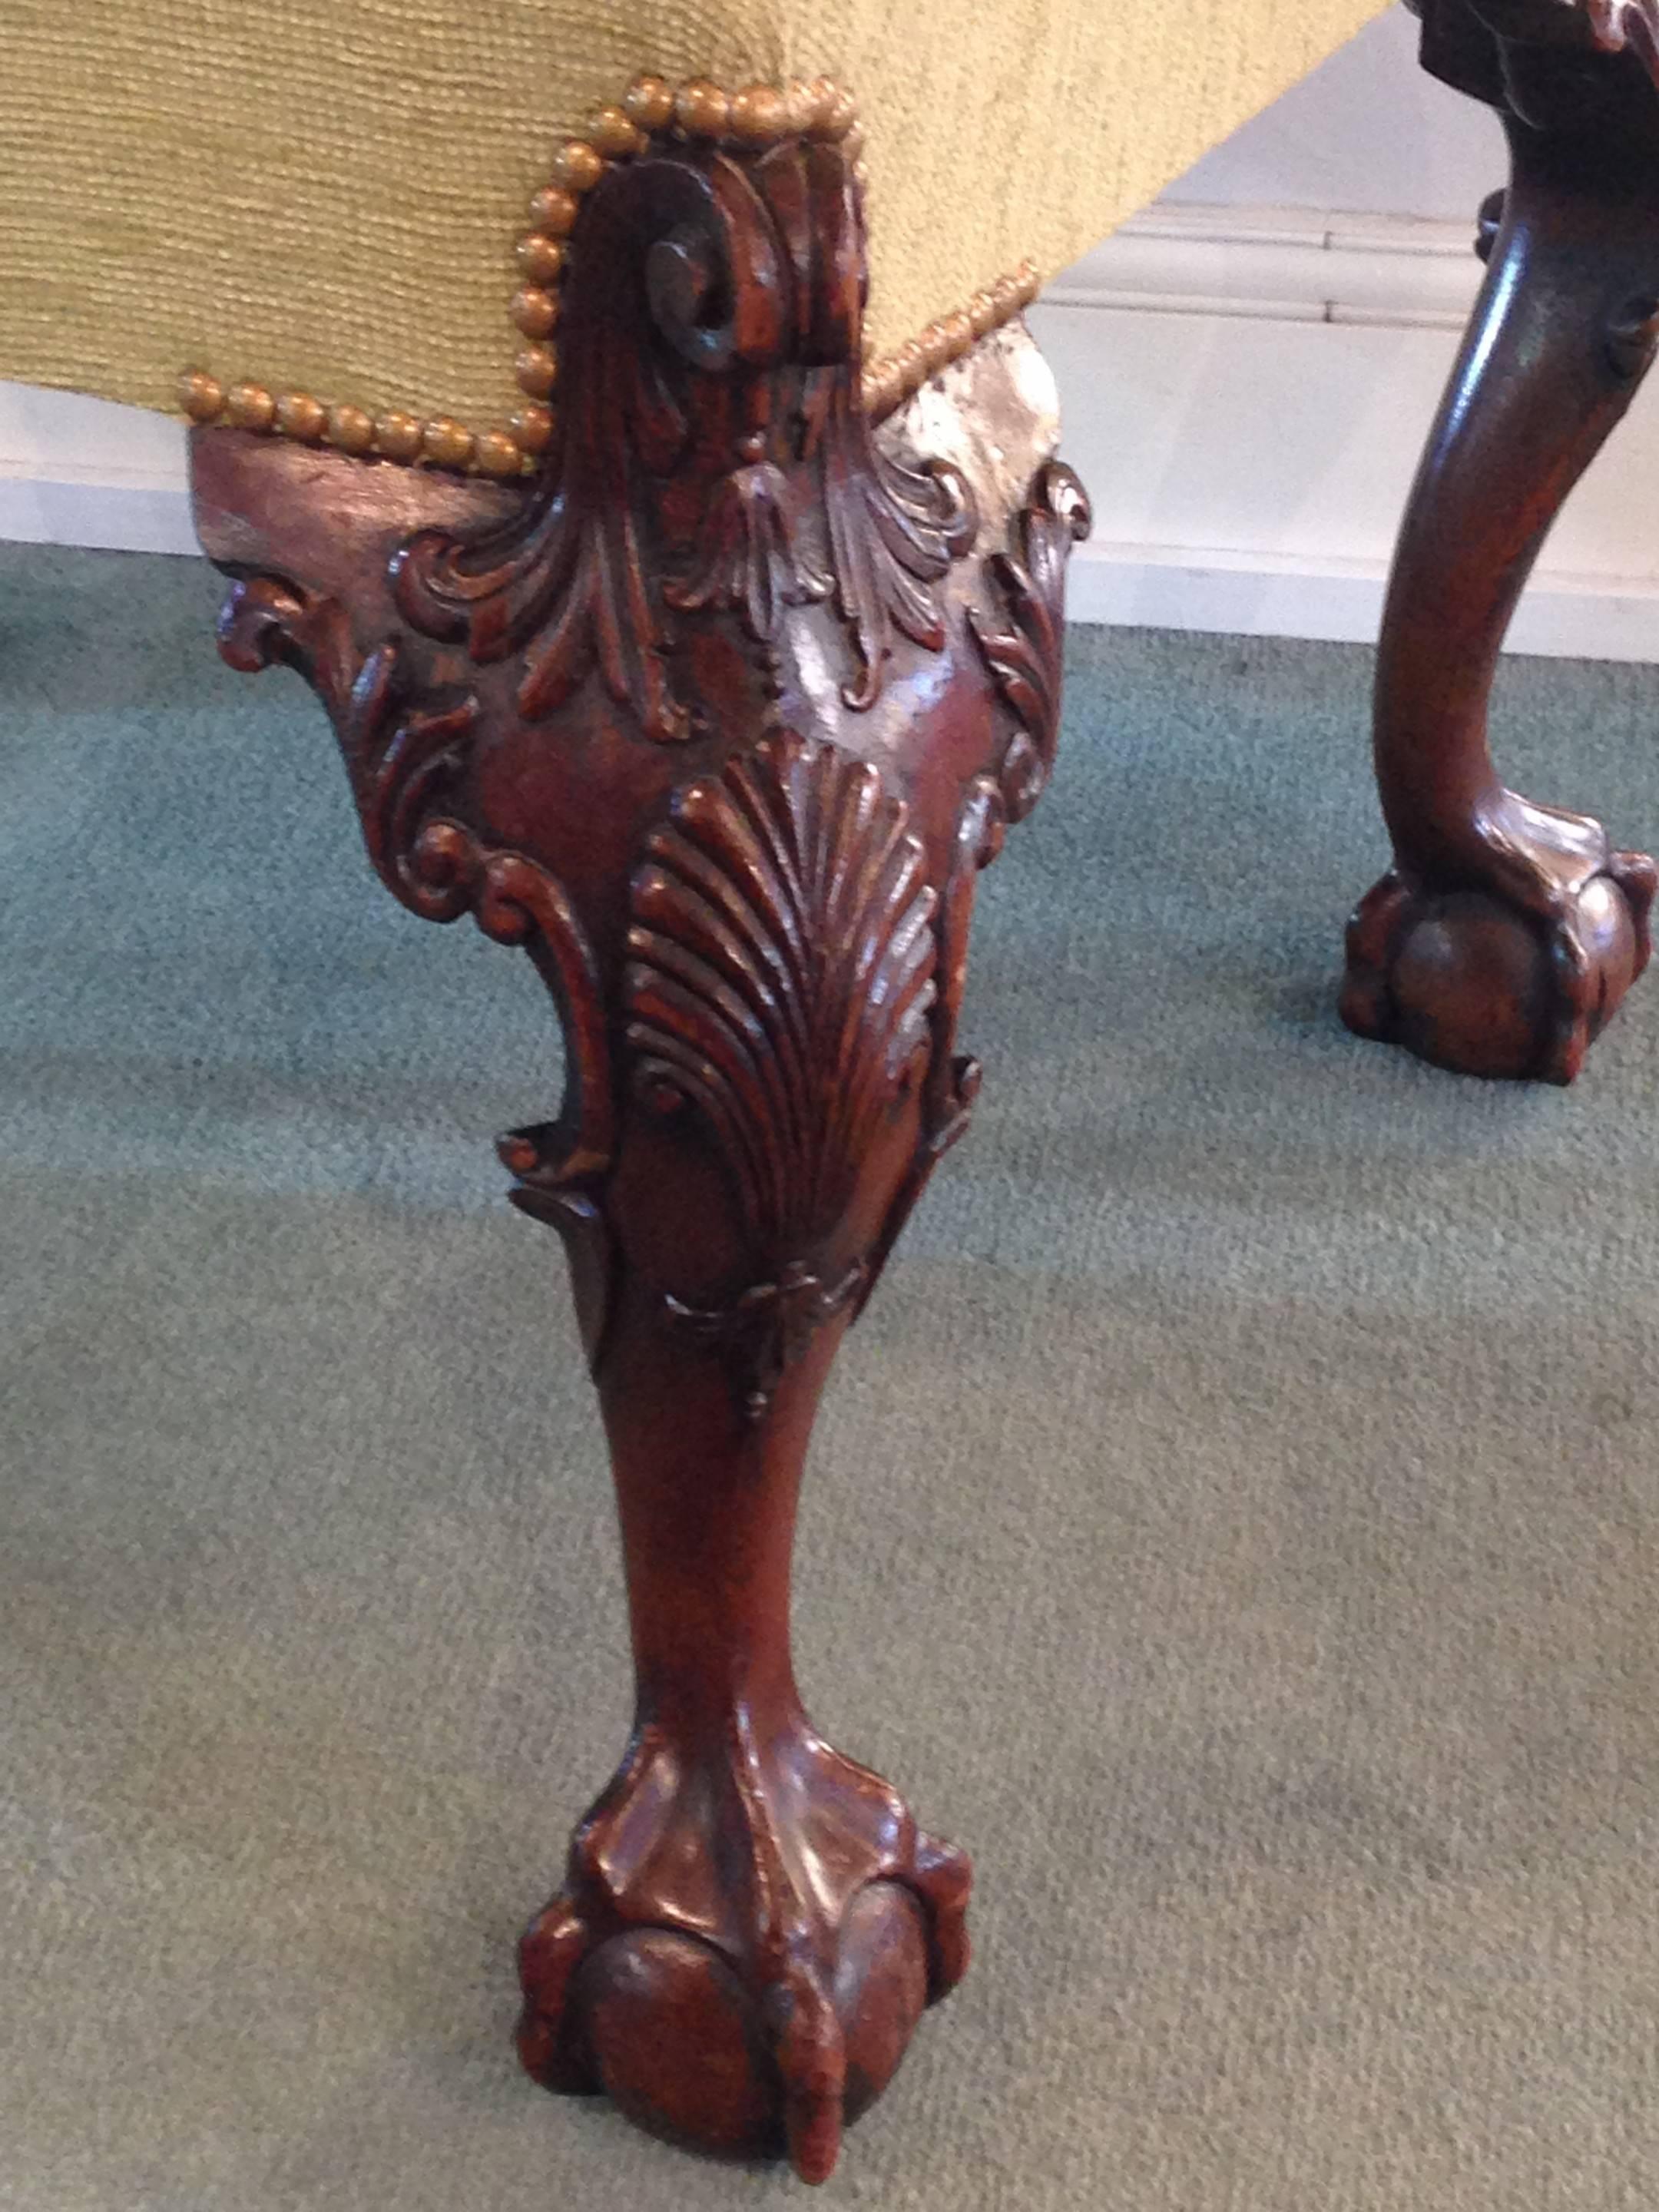 A fine quality mahogany cabriole leg stool in the George II manner. Ball and claw foot, carved shell on the knee with finely carved acanthus leaf carvings. The whole has wonderful presence, very much like the original 18th century article.